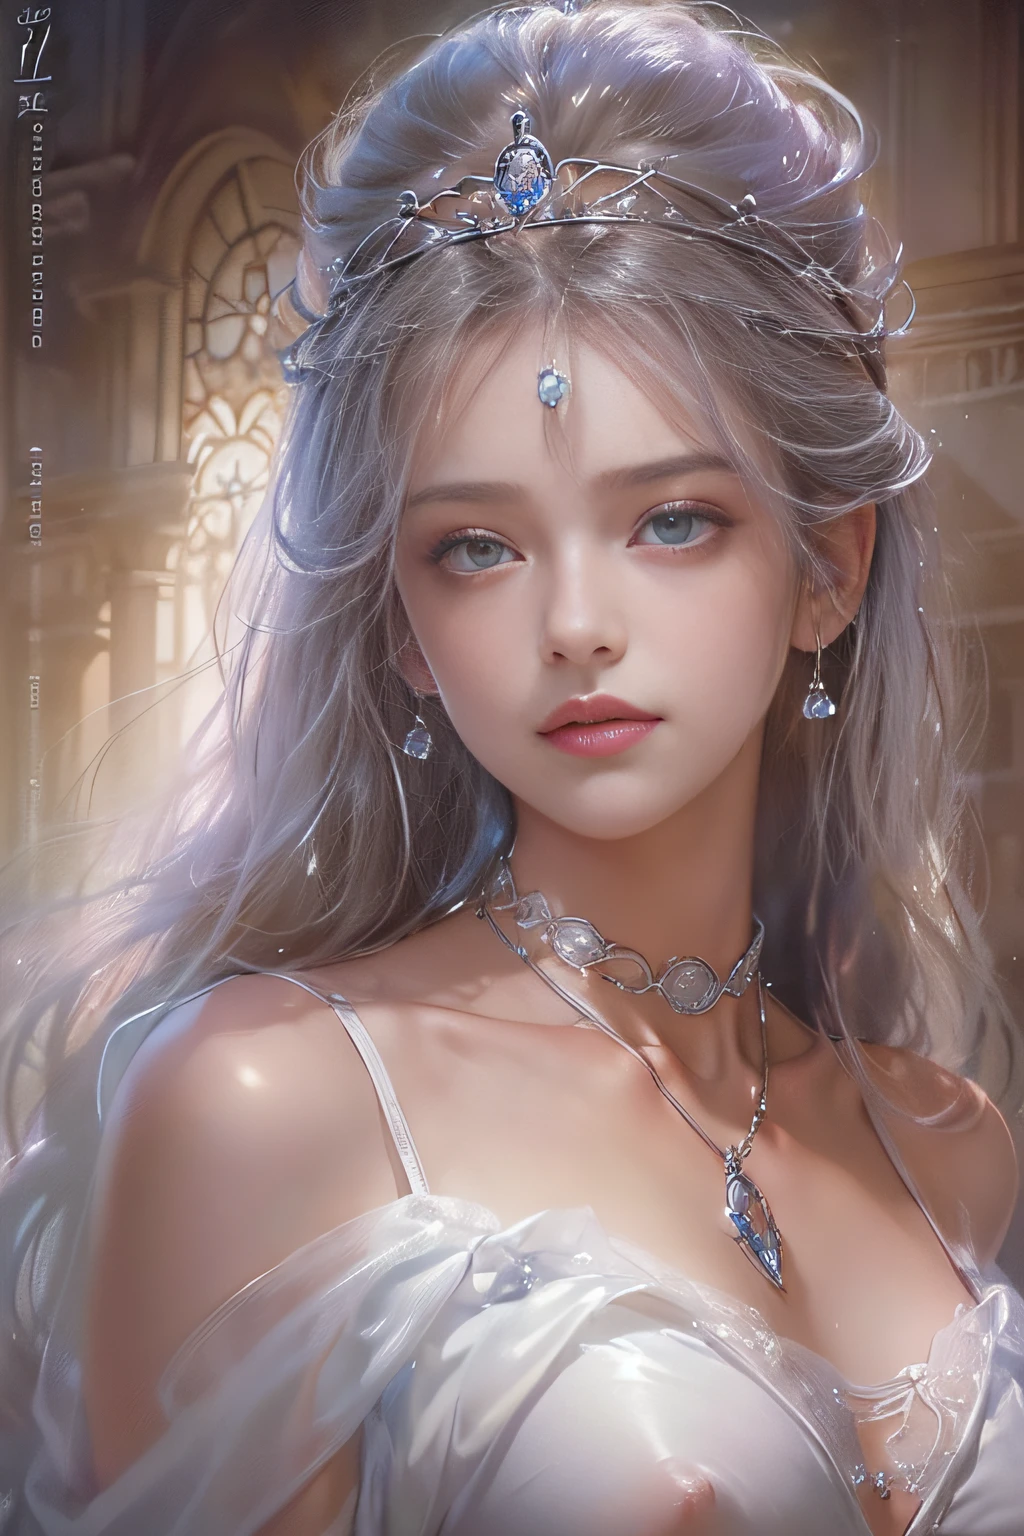 ((tmasterpiece:1.4)、(top-quality:1.4)、(reallistic:1.7))、By Luis Royo（By Luis Royo）Surreal portrait of a beautiful girl、Super beautiful girl、((1girl in:1.4))、Shiny natural skin texture、(The Queen's Gorgeous Costume)、(Off-the-shoulder white one-piece mini skirt type type:1.4)、((up skirt)),Authors：By Luis Royo（By Luis Royo）、age19、(Two arms:1.4、Two legs:1.4)、(perfect anatomia:1.4)、(Perfect female body:1.4)、Portrait photo of a girl、Close-up photos、Upper body photography、Fantasyart、Soft front light、Beautiful expression、kawaii faces、Beautiful udder、large full breasts:1.2、Beautiful ass、A detailed eye、Clearly eye-catching, beautiful and alluring、beautidful eyes、Narrow waist、Raw photo、red rip、Arrange your long hair as cool as a queen、(tiara crown:1.4、choker necklace:1.4、a necklace:1.4、耳Nipple Ring:1.4)、1 screen display、((In front of the city walls、Woman standing in front of bench)),((Translucent off-shoulder white dress))、((A smile)),((posterior view))、((Looks Back))、((White T-back panties visible)),